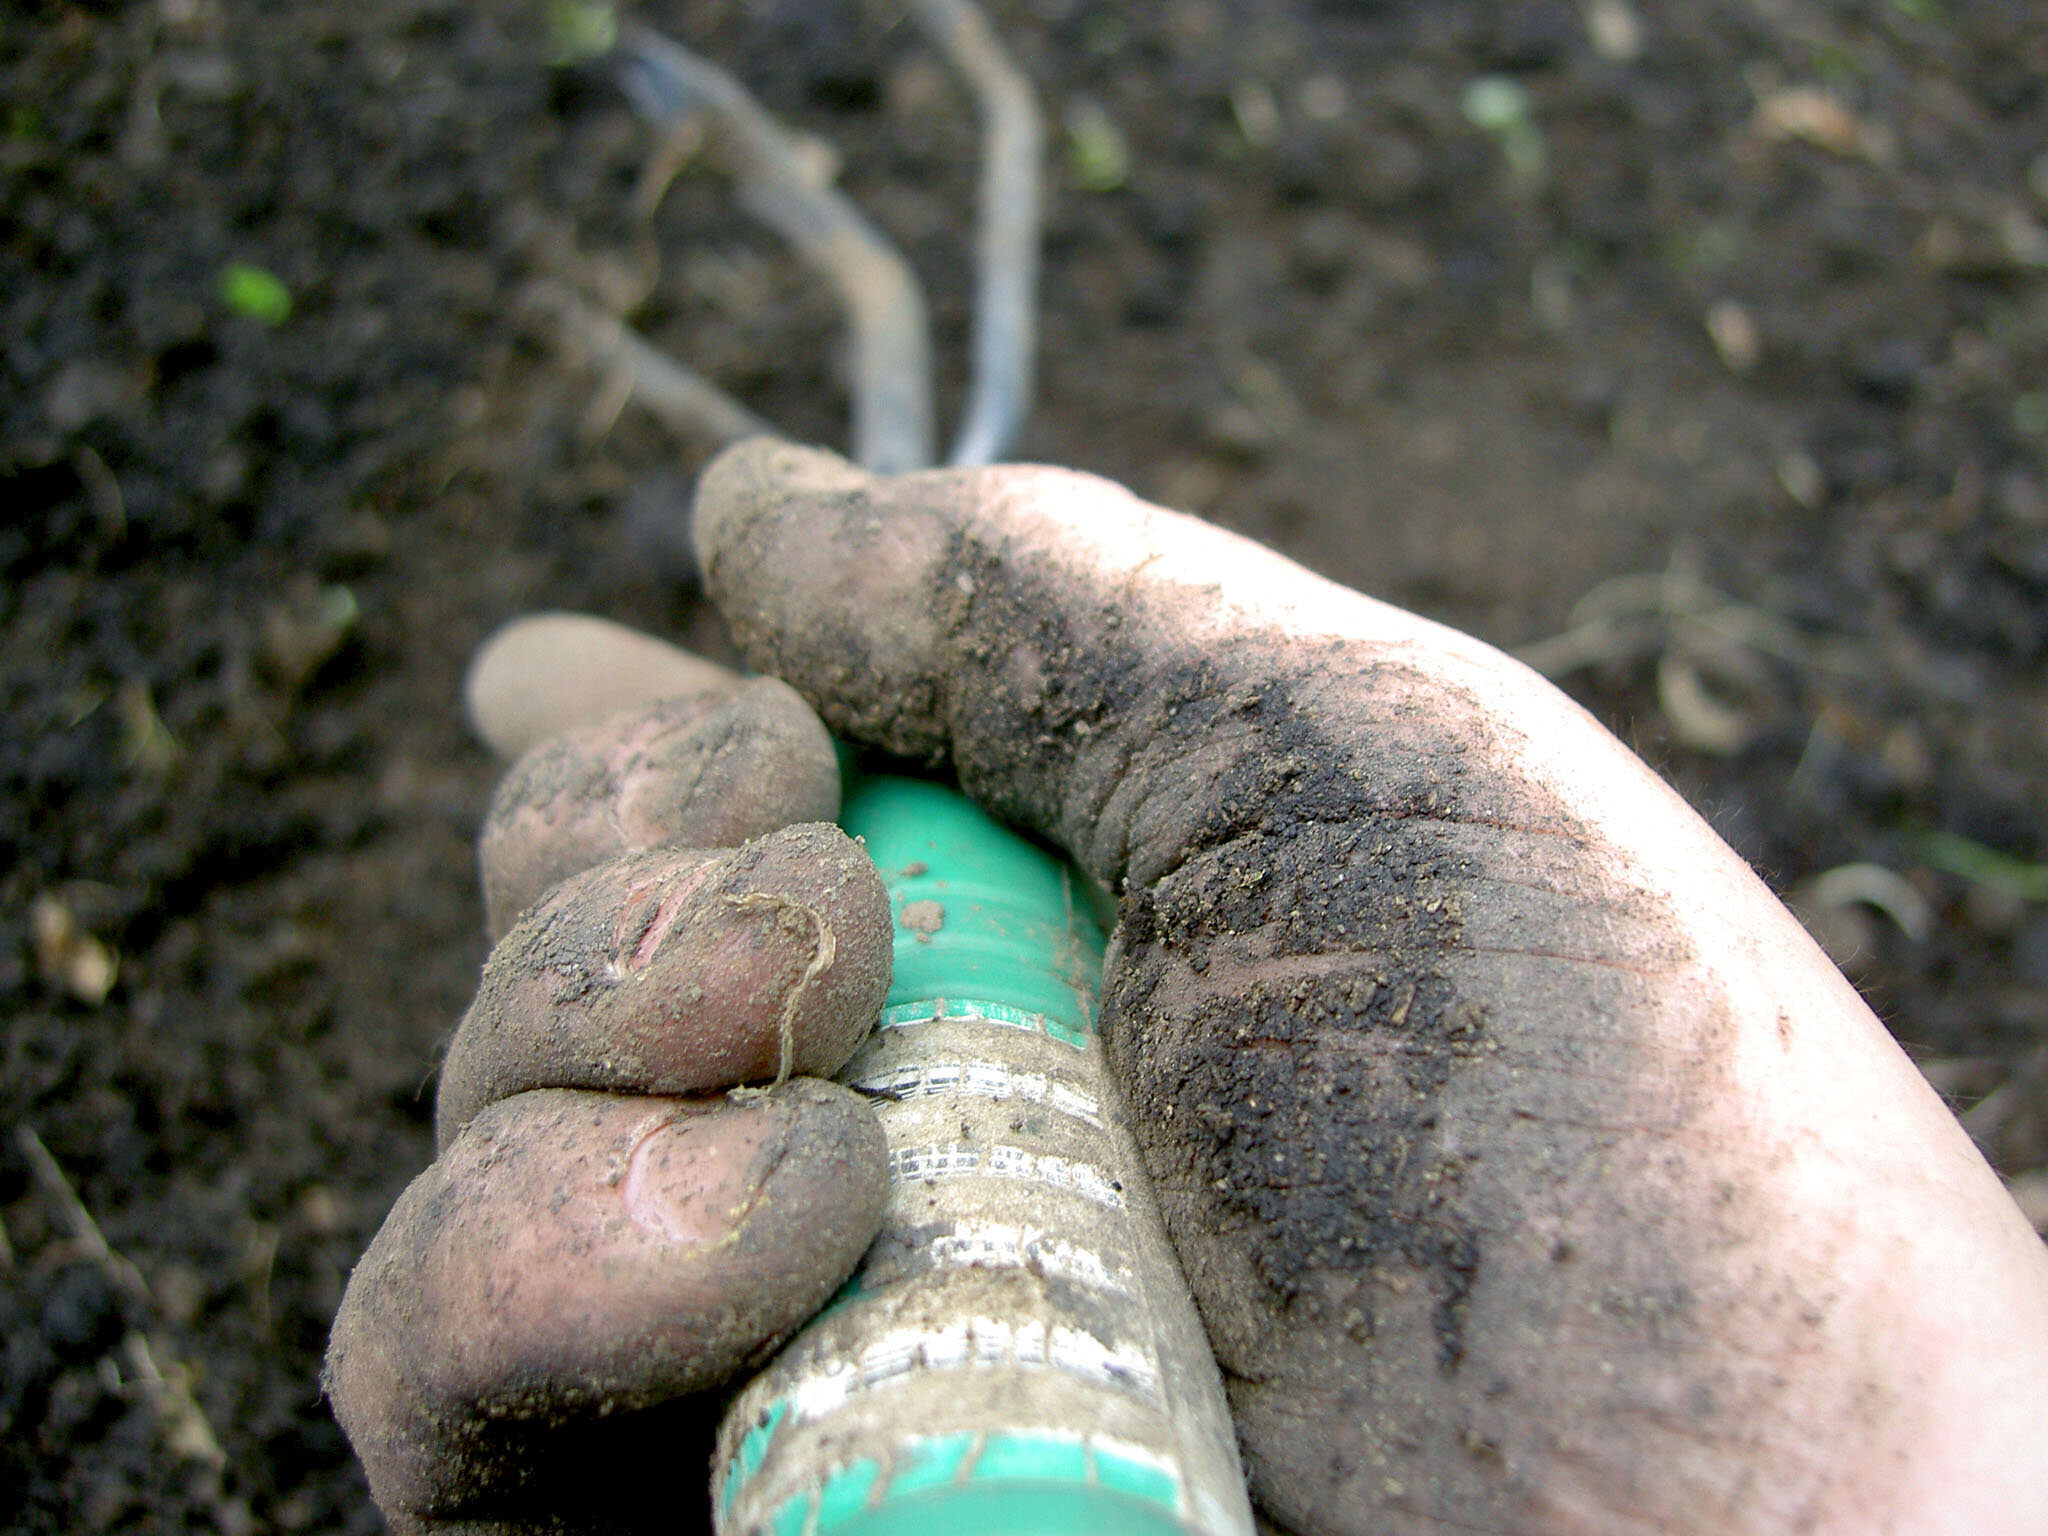 Soil biology research can help create a more sustainable future